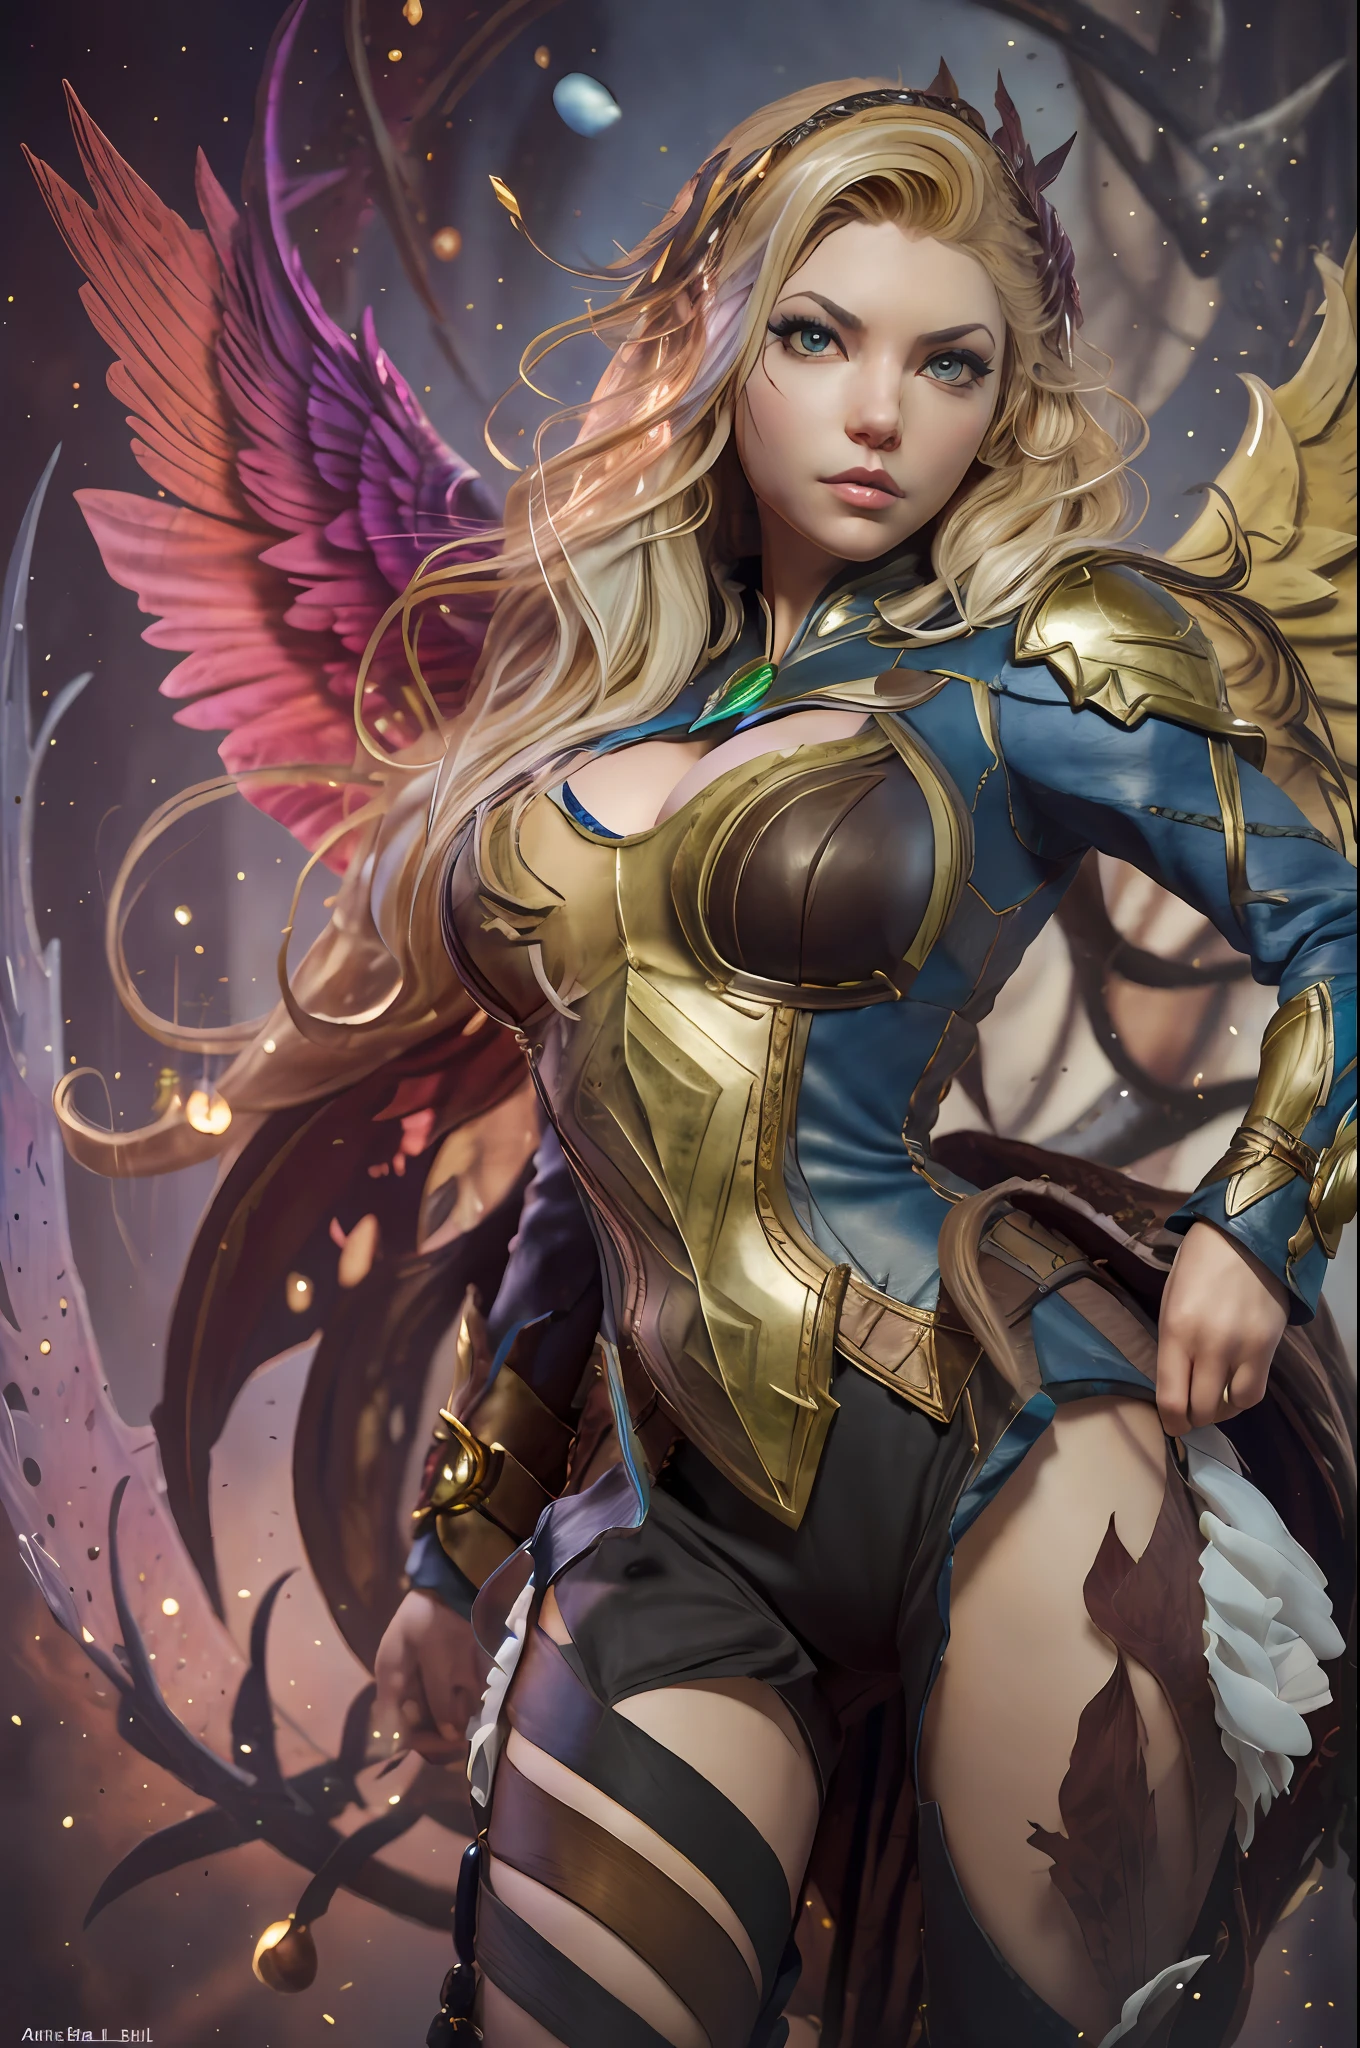 a close up of a woman in a costume with wings, artgerm julie bell beeple, extremely detailed artgerm, artgerm jsc, artgerm detailed, featured on artgerm, ig model | artgerm, samira from league of legends, as seen on artgerm, artgerm and rossdraws, Full Body Woman.